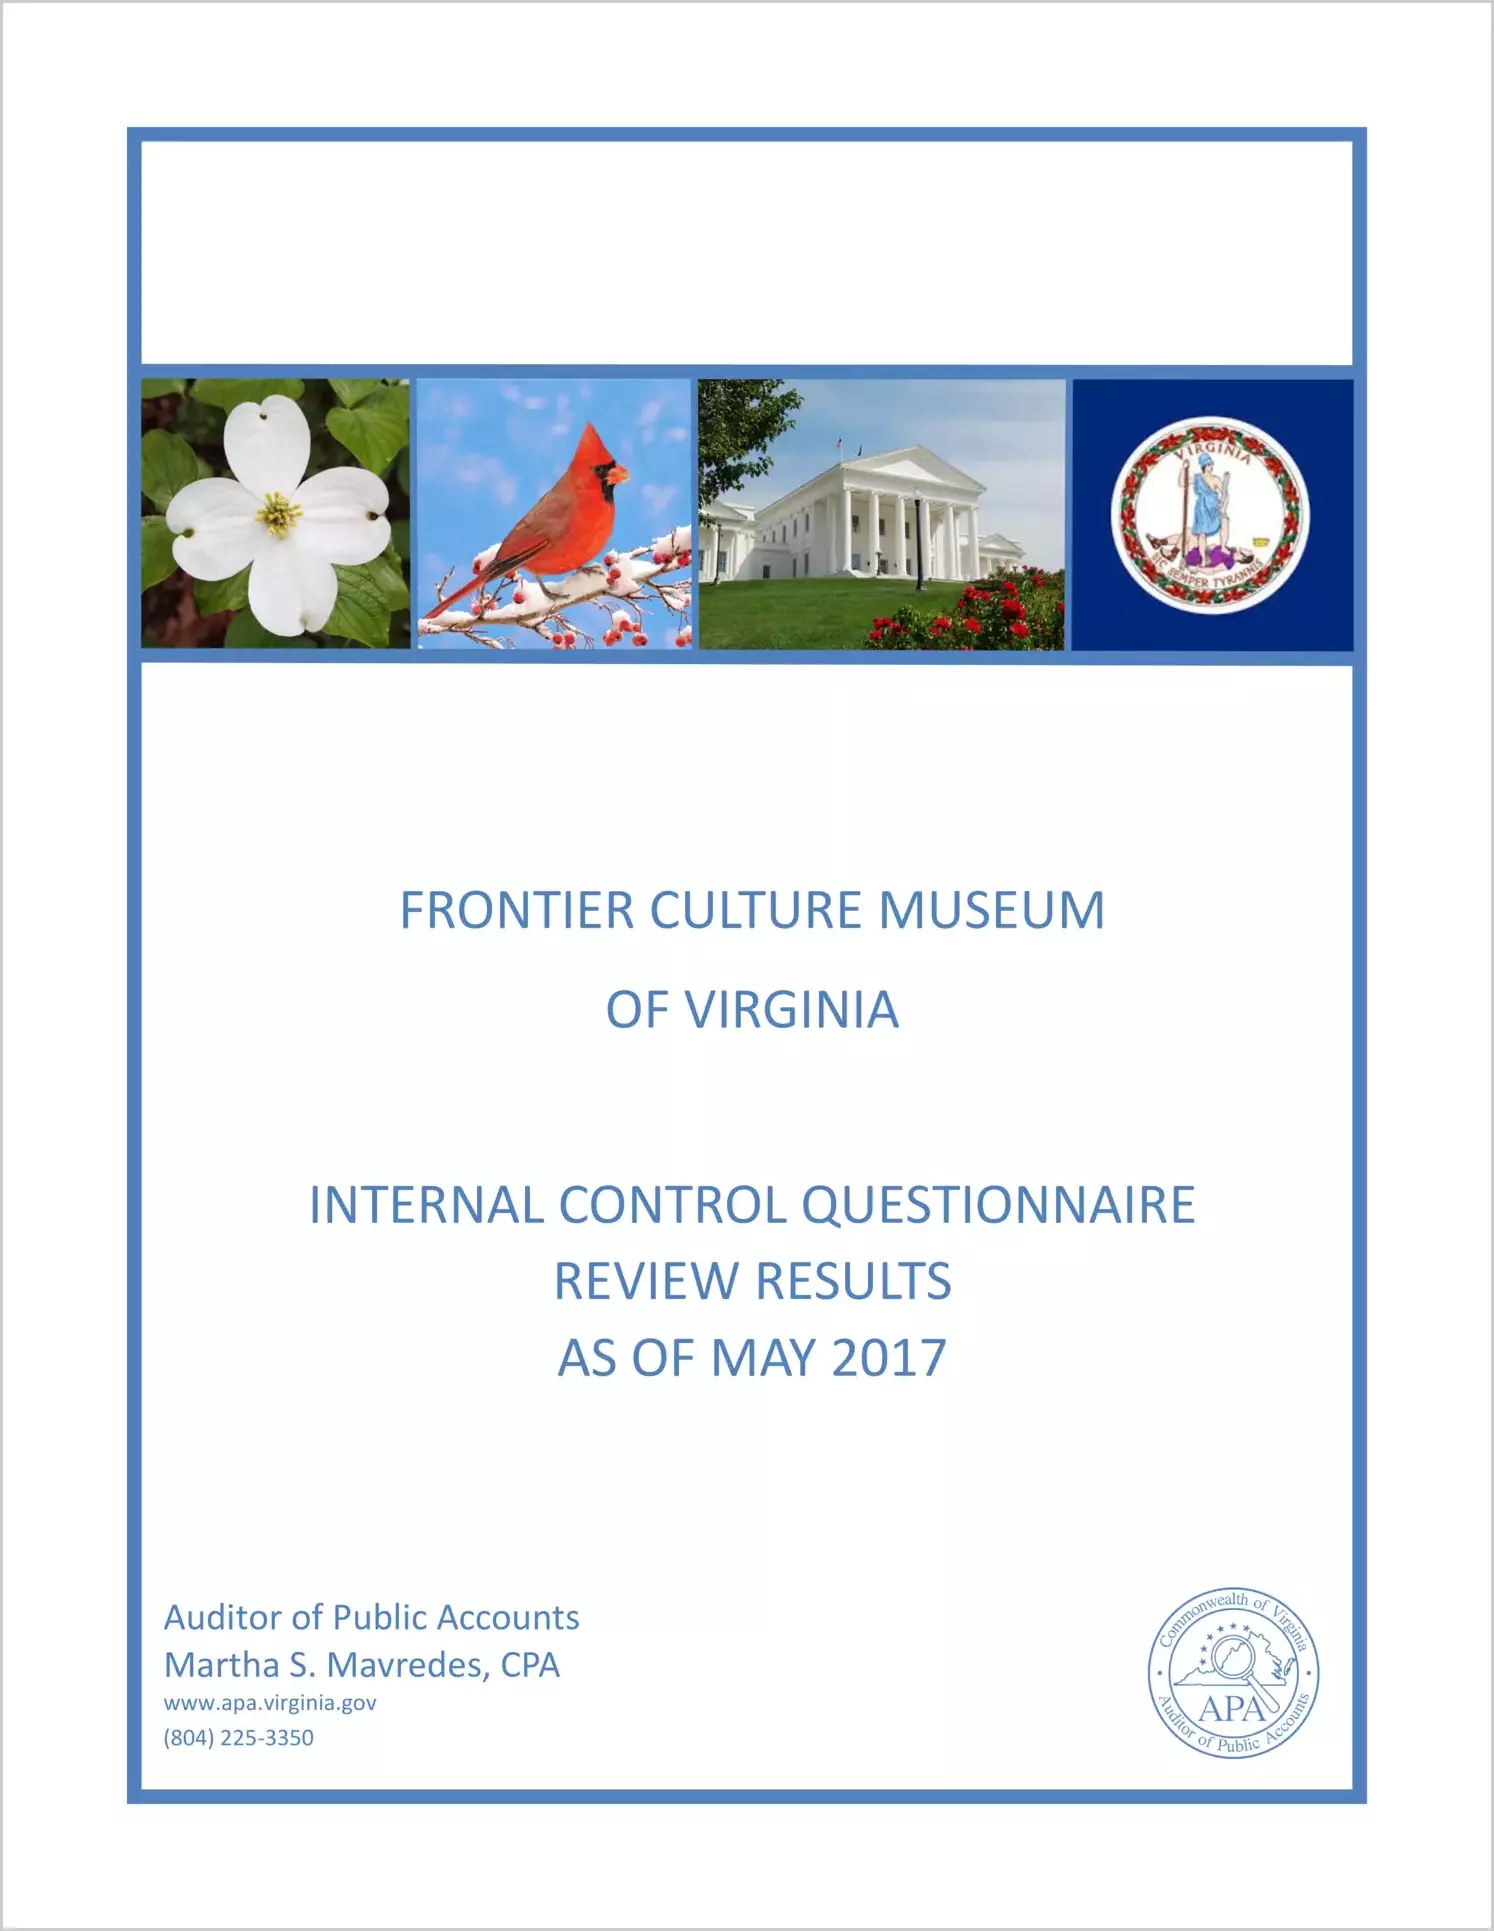 Frontier Culture Museum of Virginia Internal Control Questionnaire Review Results as of May 2017